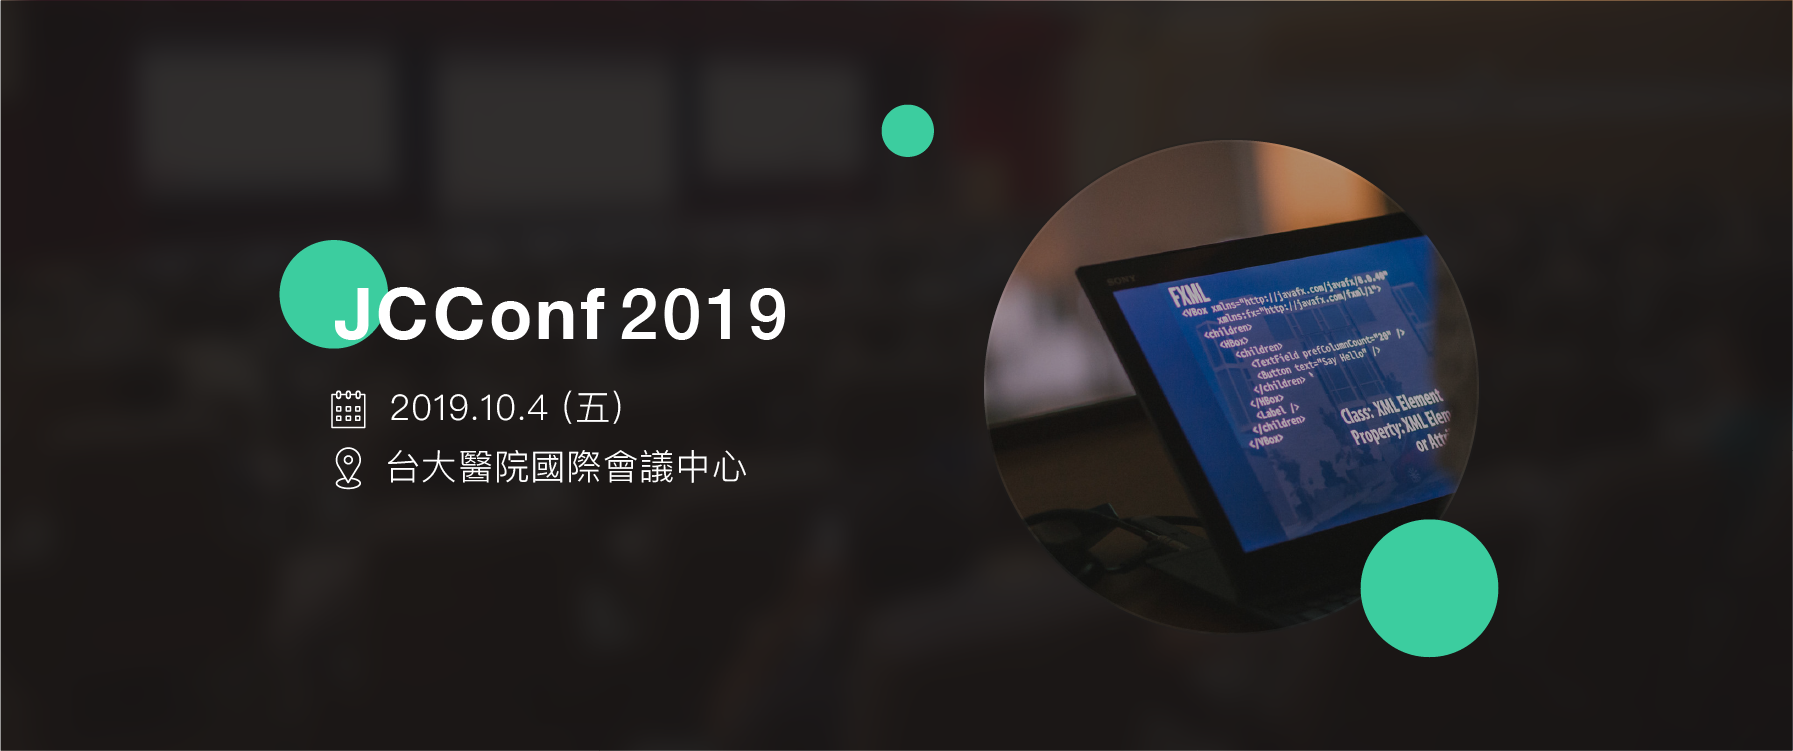 Event cover image for JCConf 2019